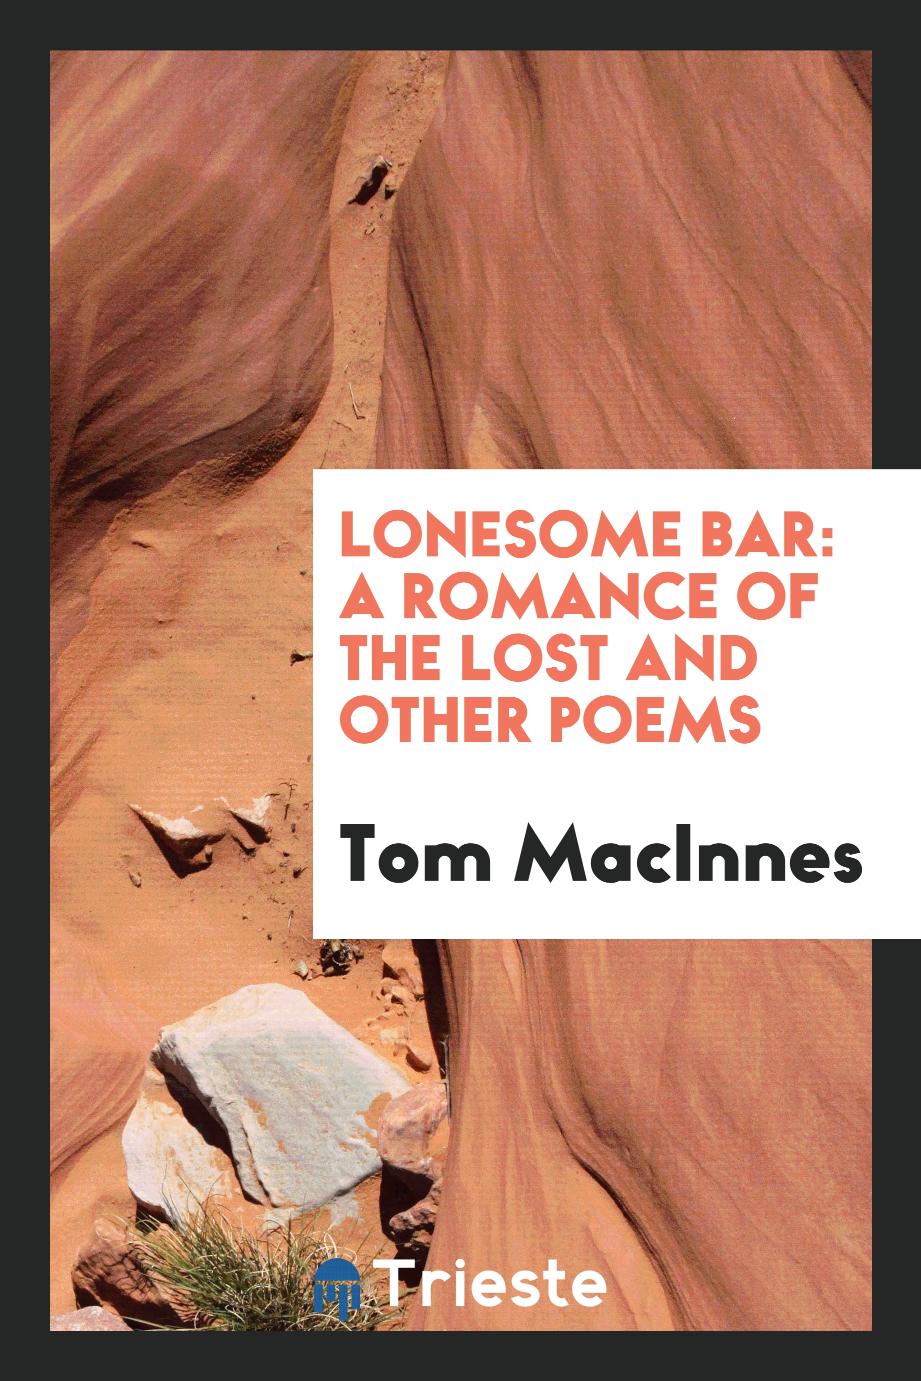 Tom MacInnes - Lonesome bar: a romance of the lost and other poems